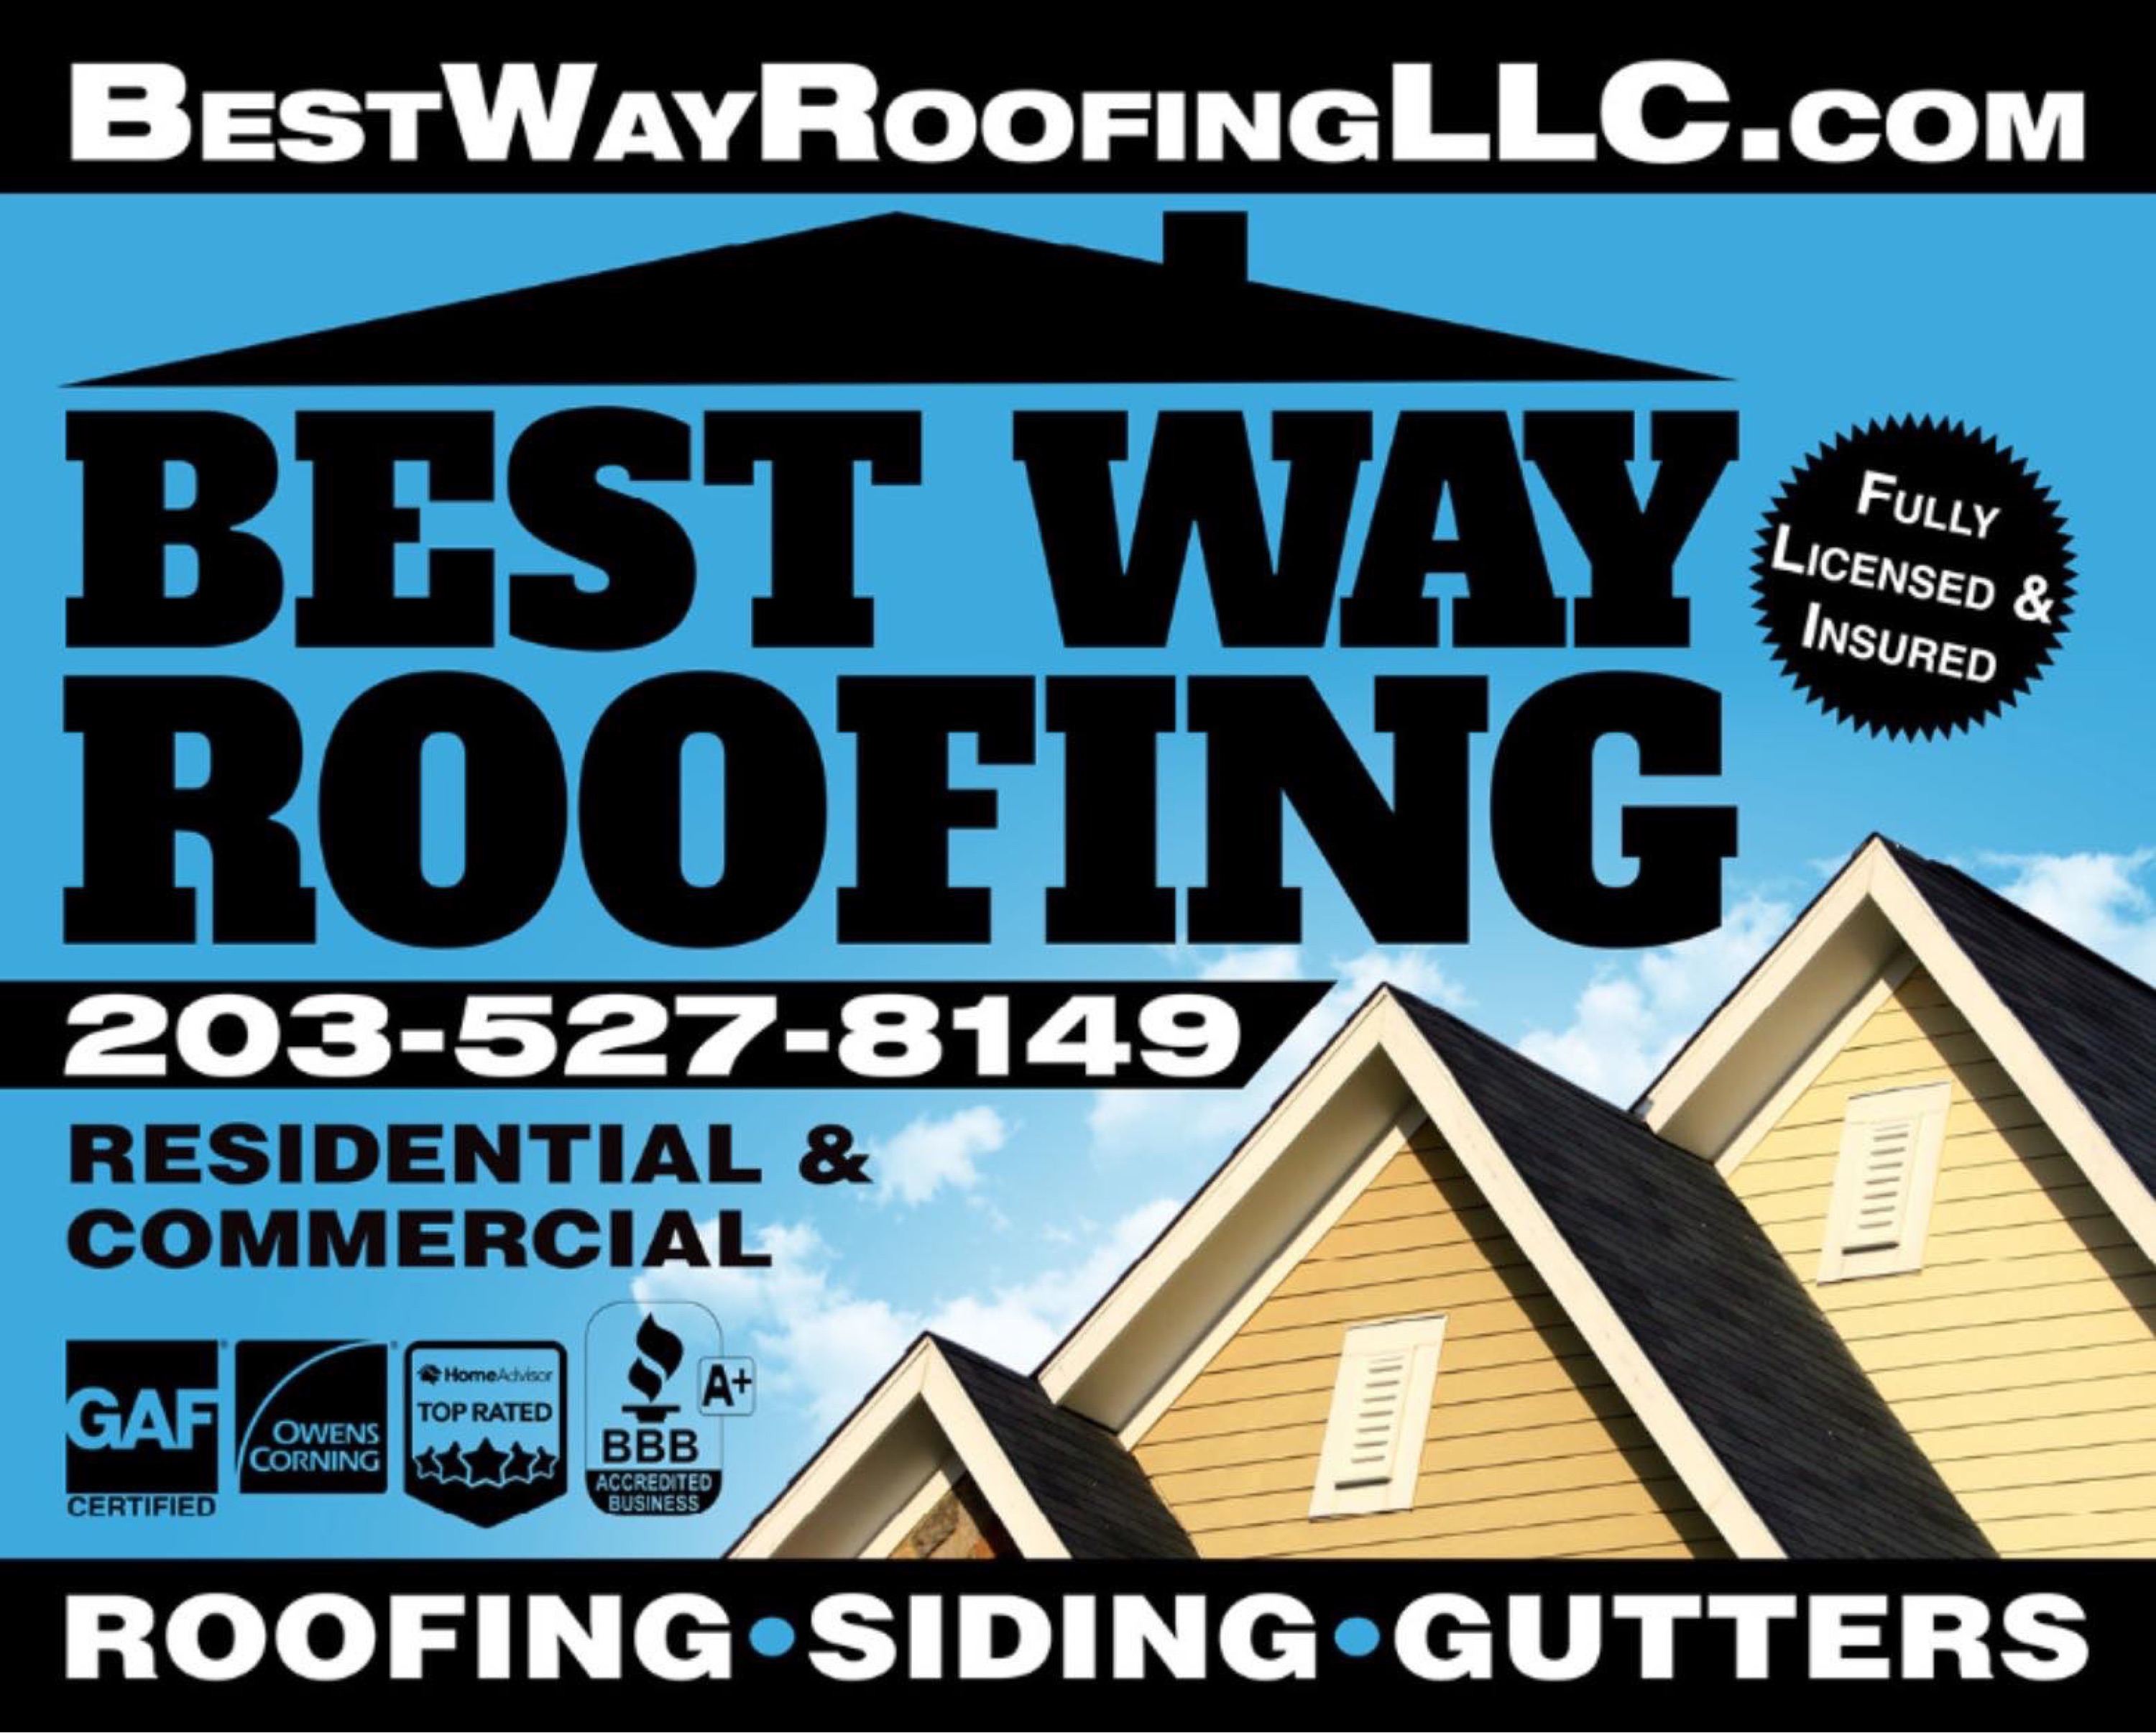 Best Way Siding and Roofing, LLC Logo